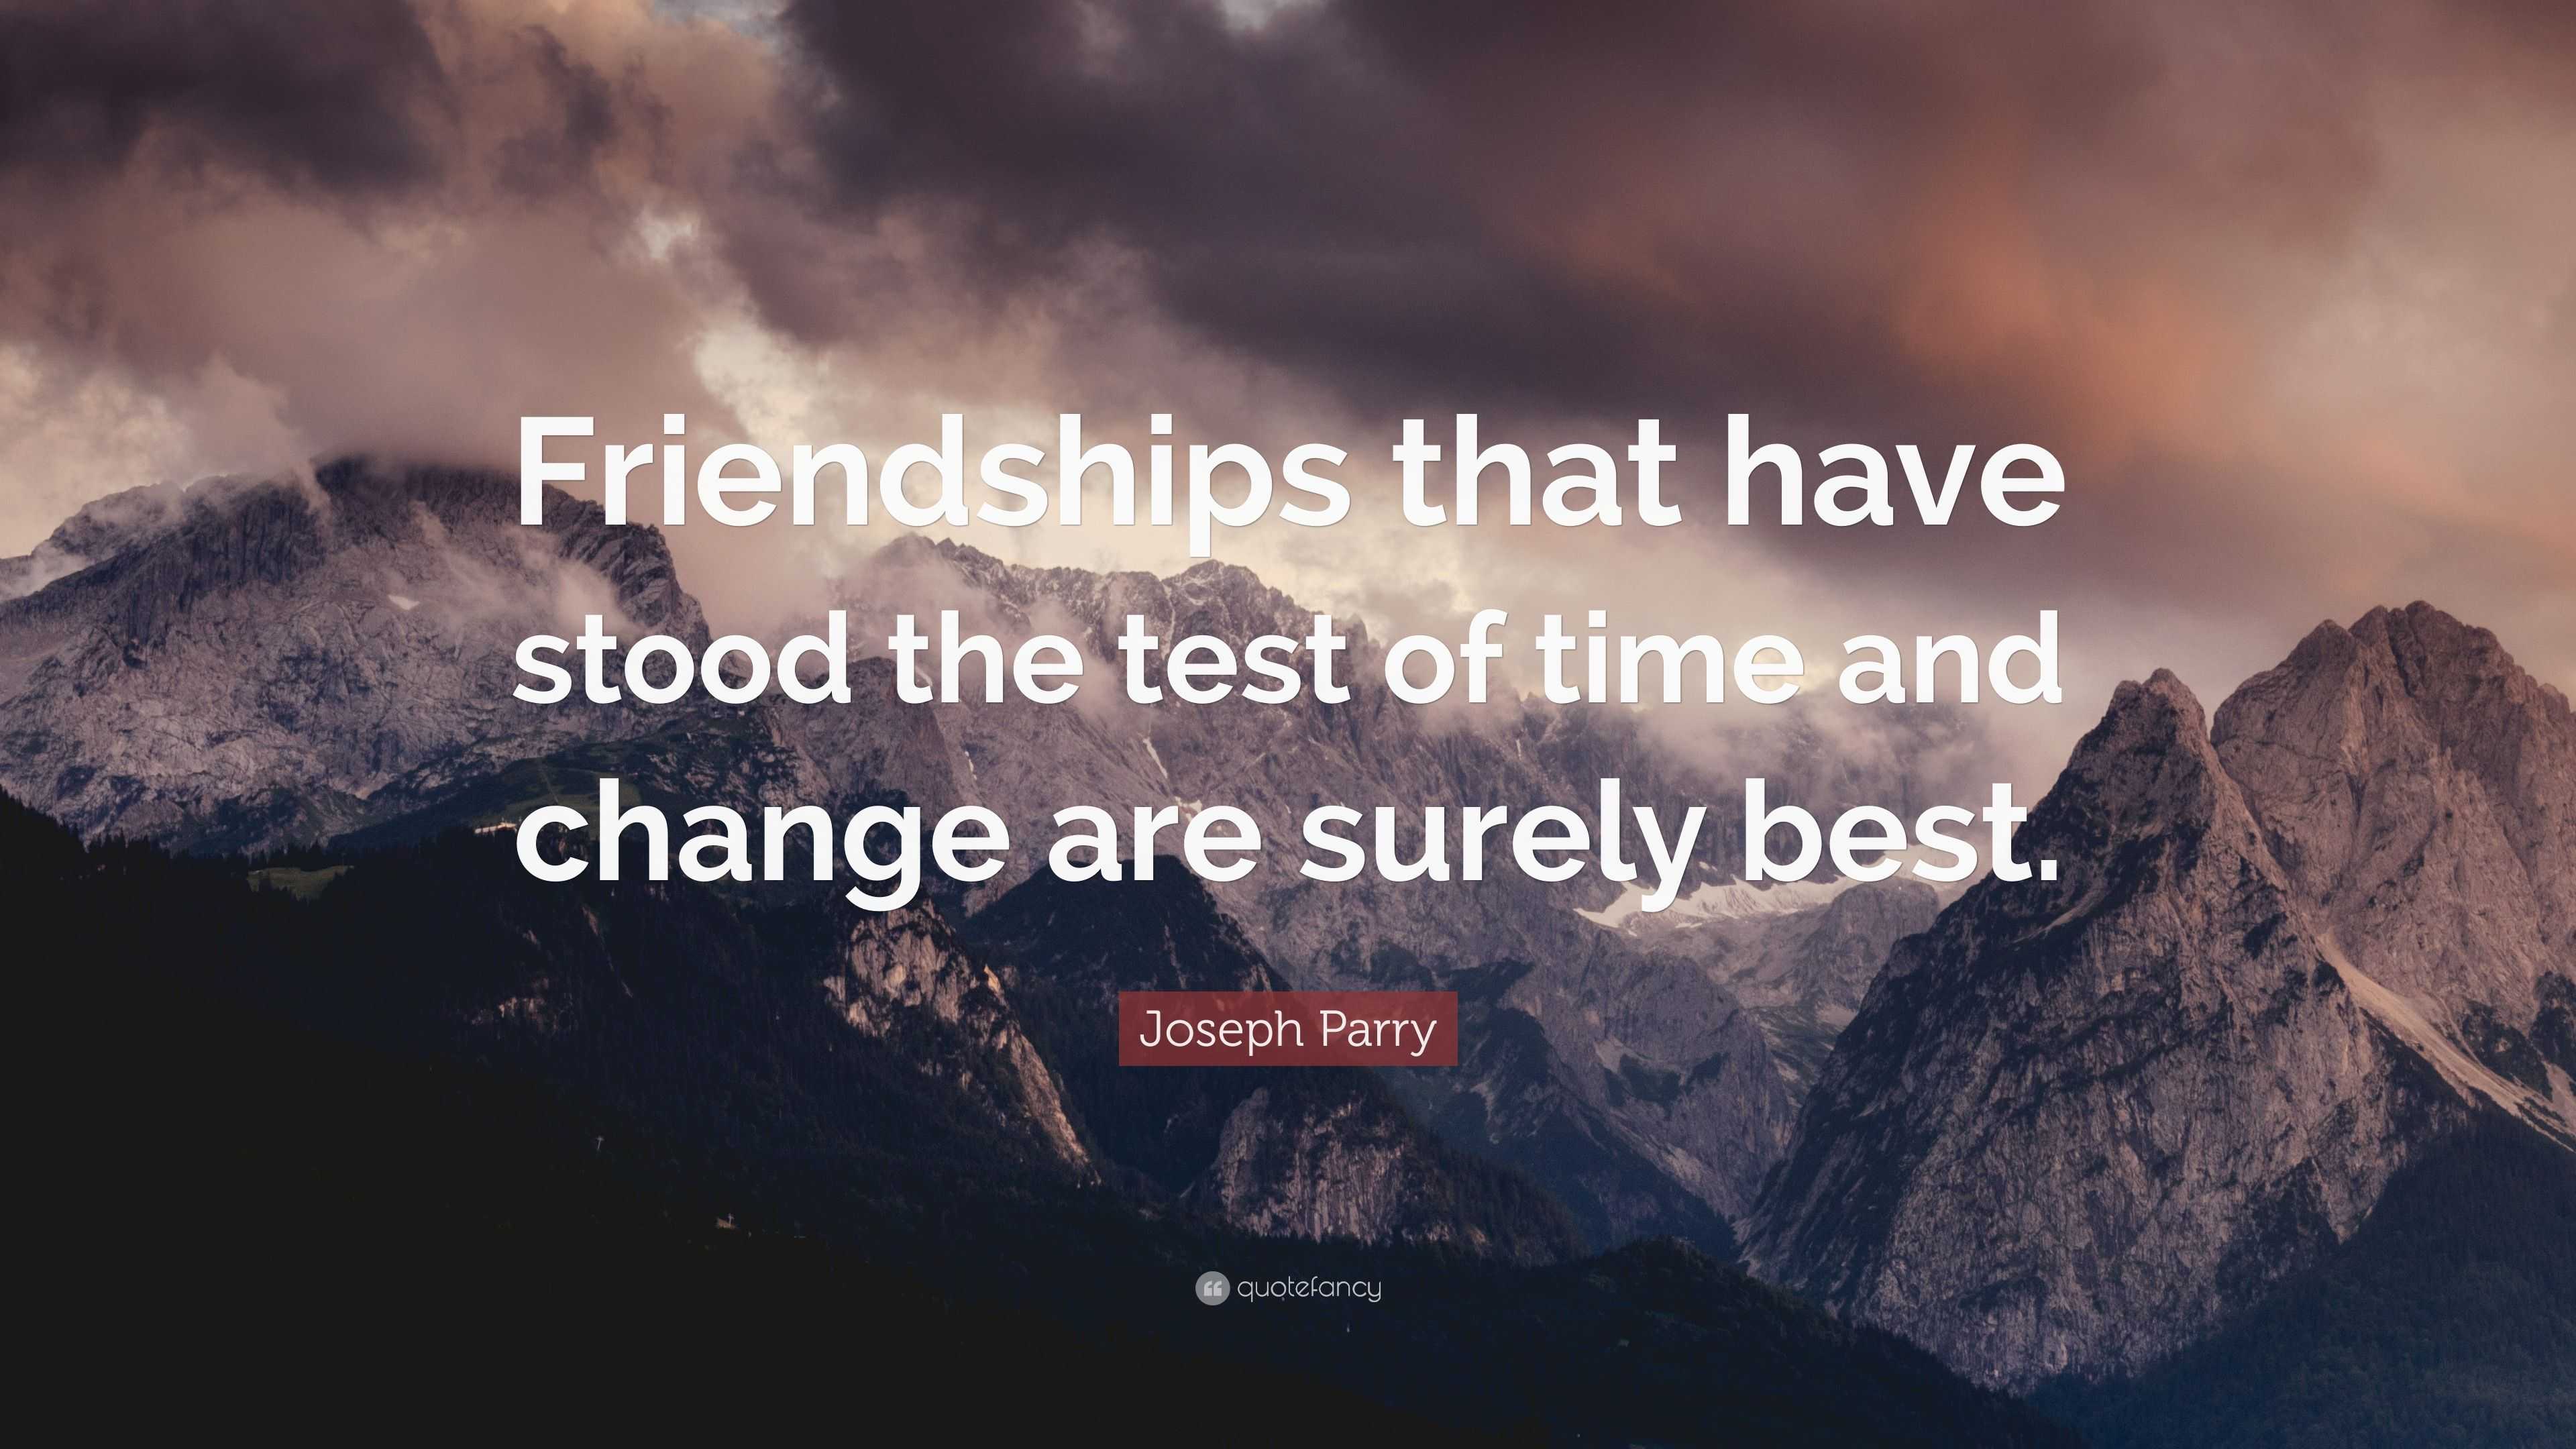 Joseph Parry Quote: “Friendships that have the test of time and change are surely best.”